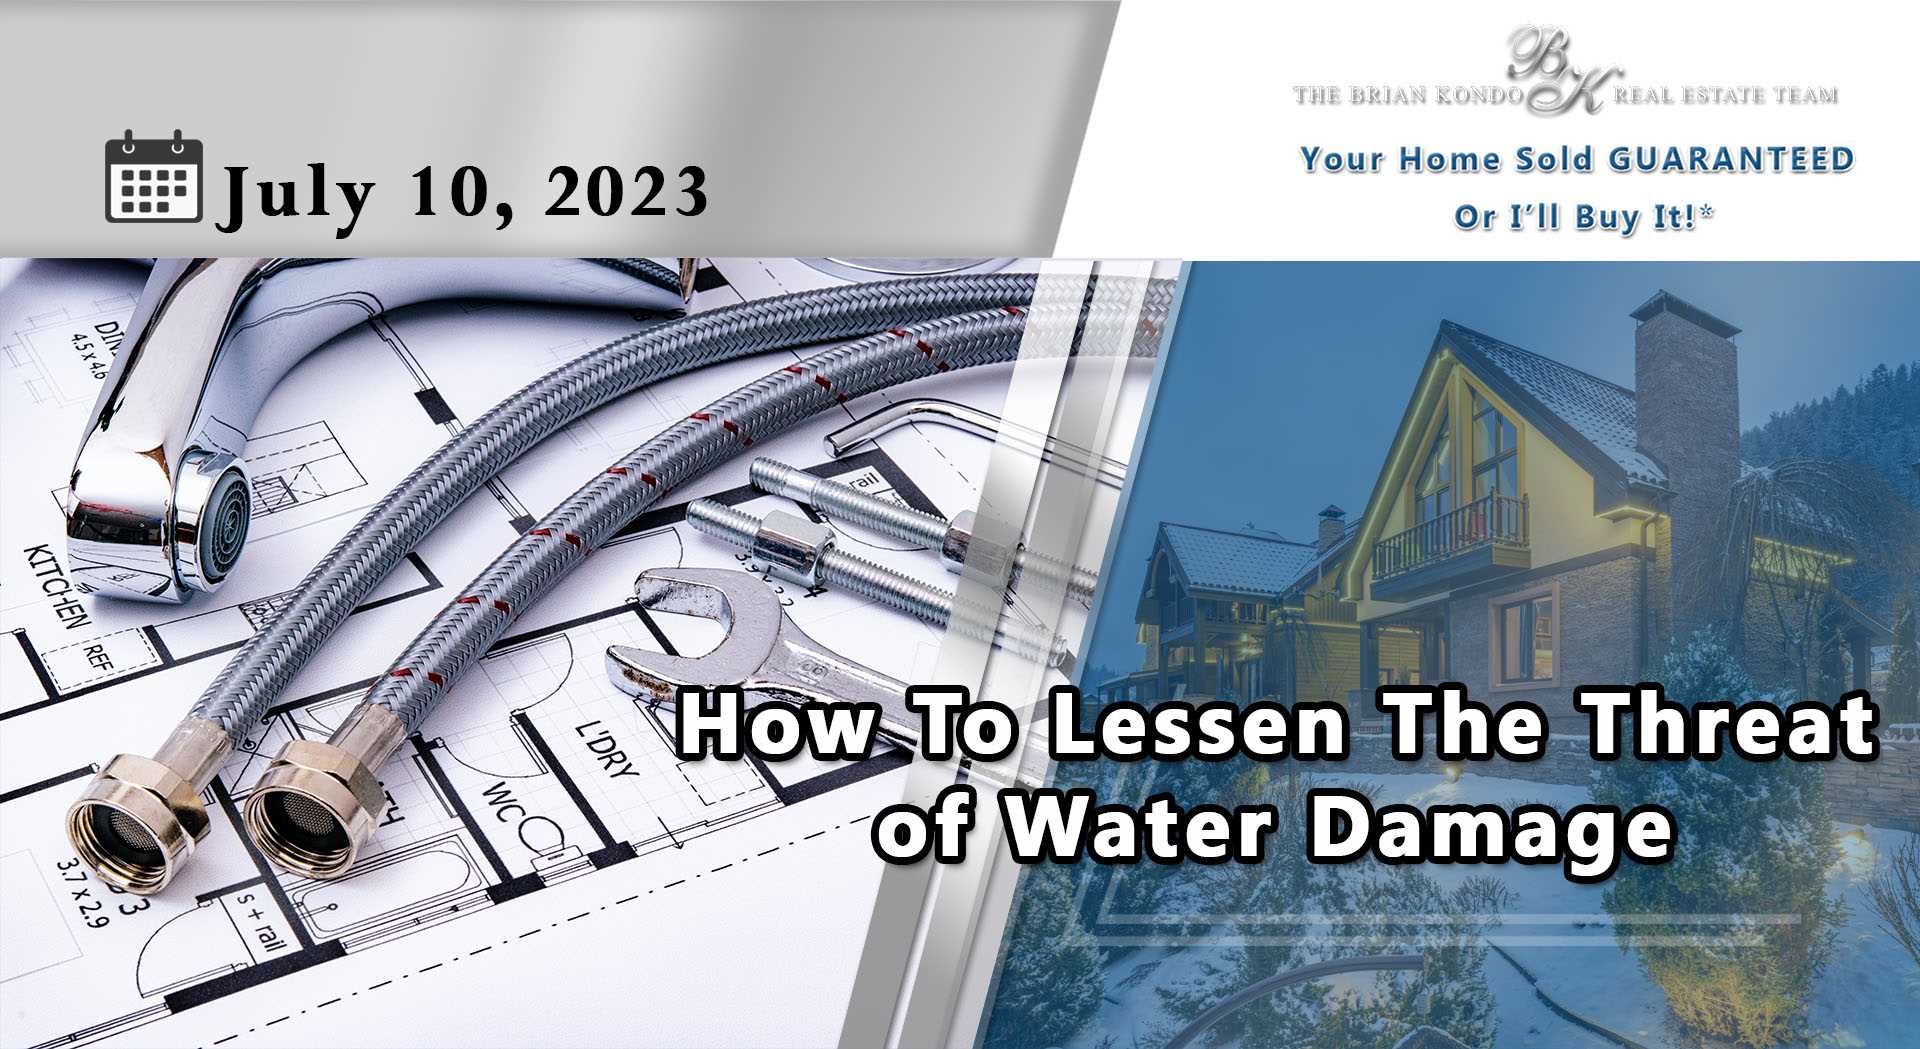 How To Lessen The Threat of Water Damage